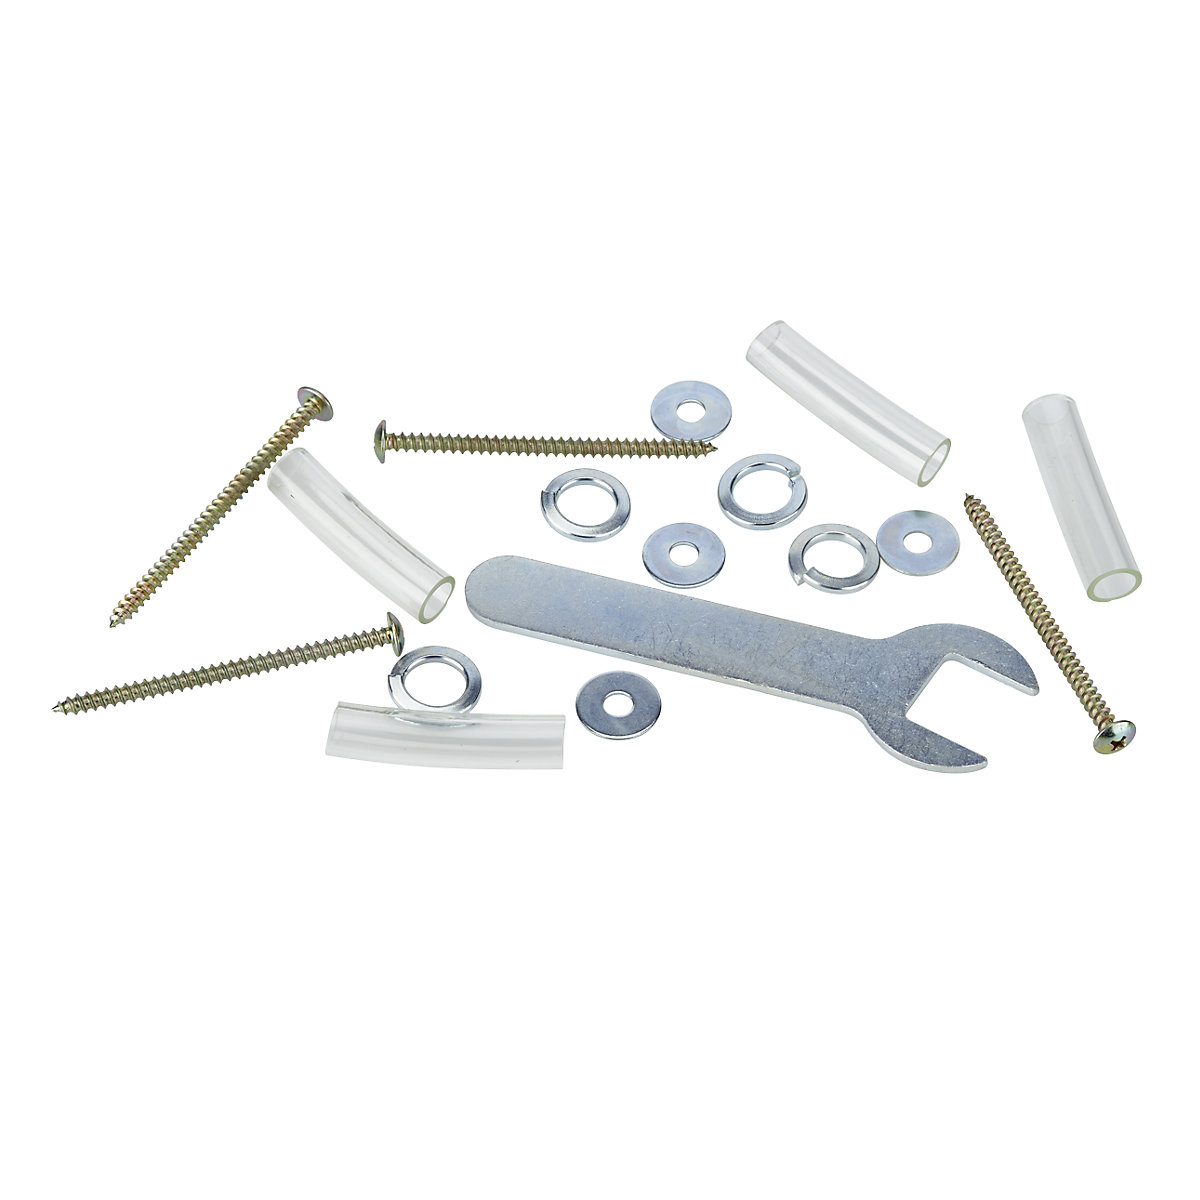 Mounting set for general purpose truck